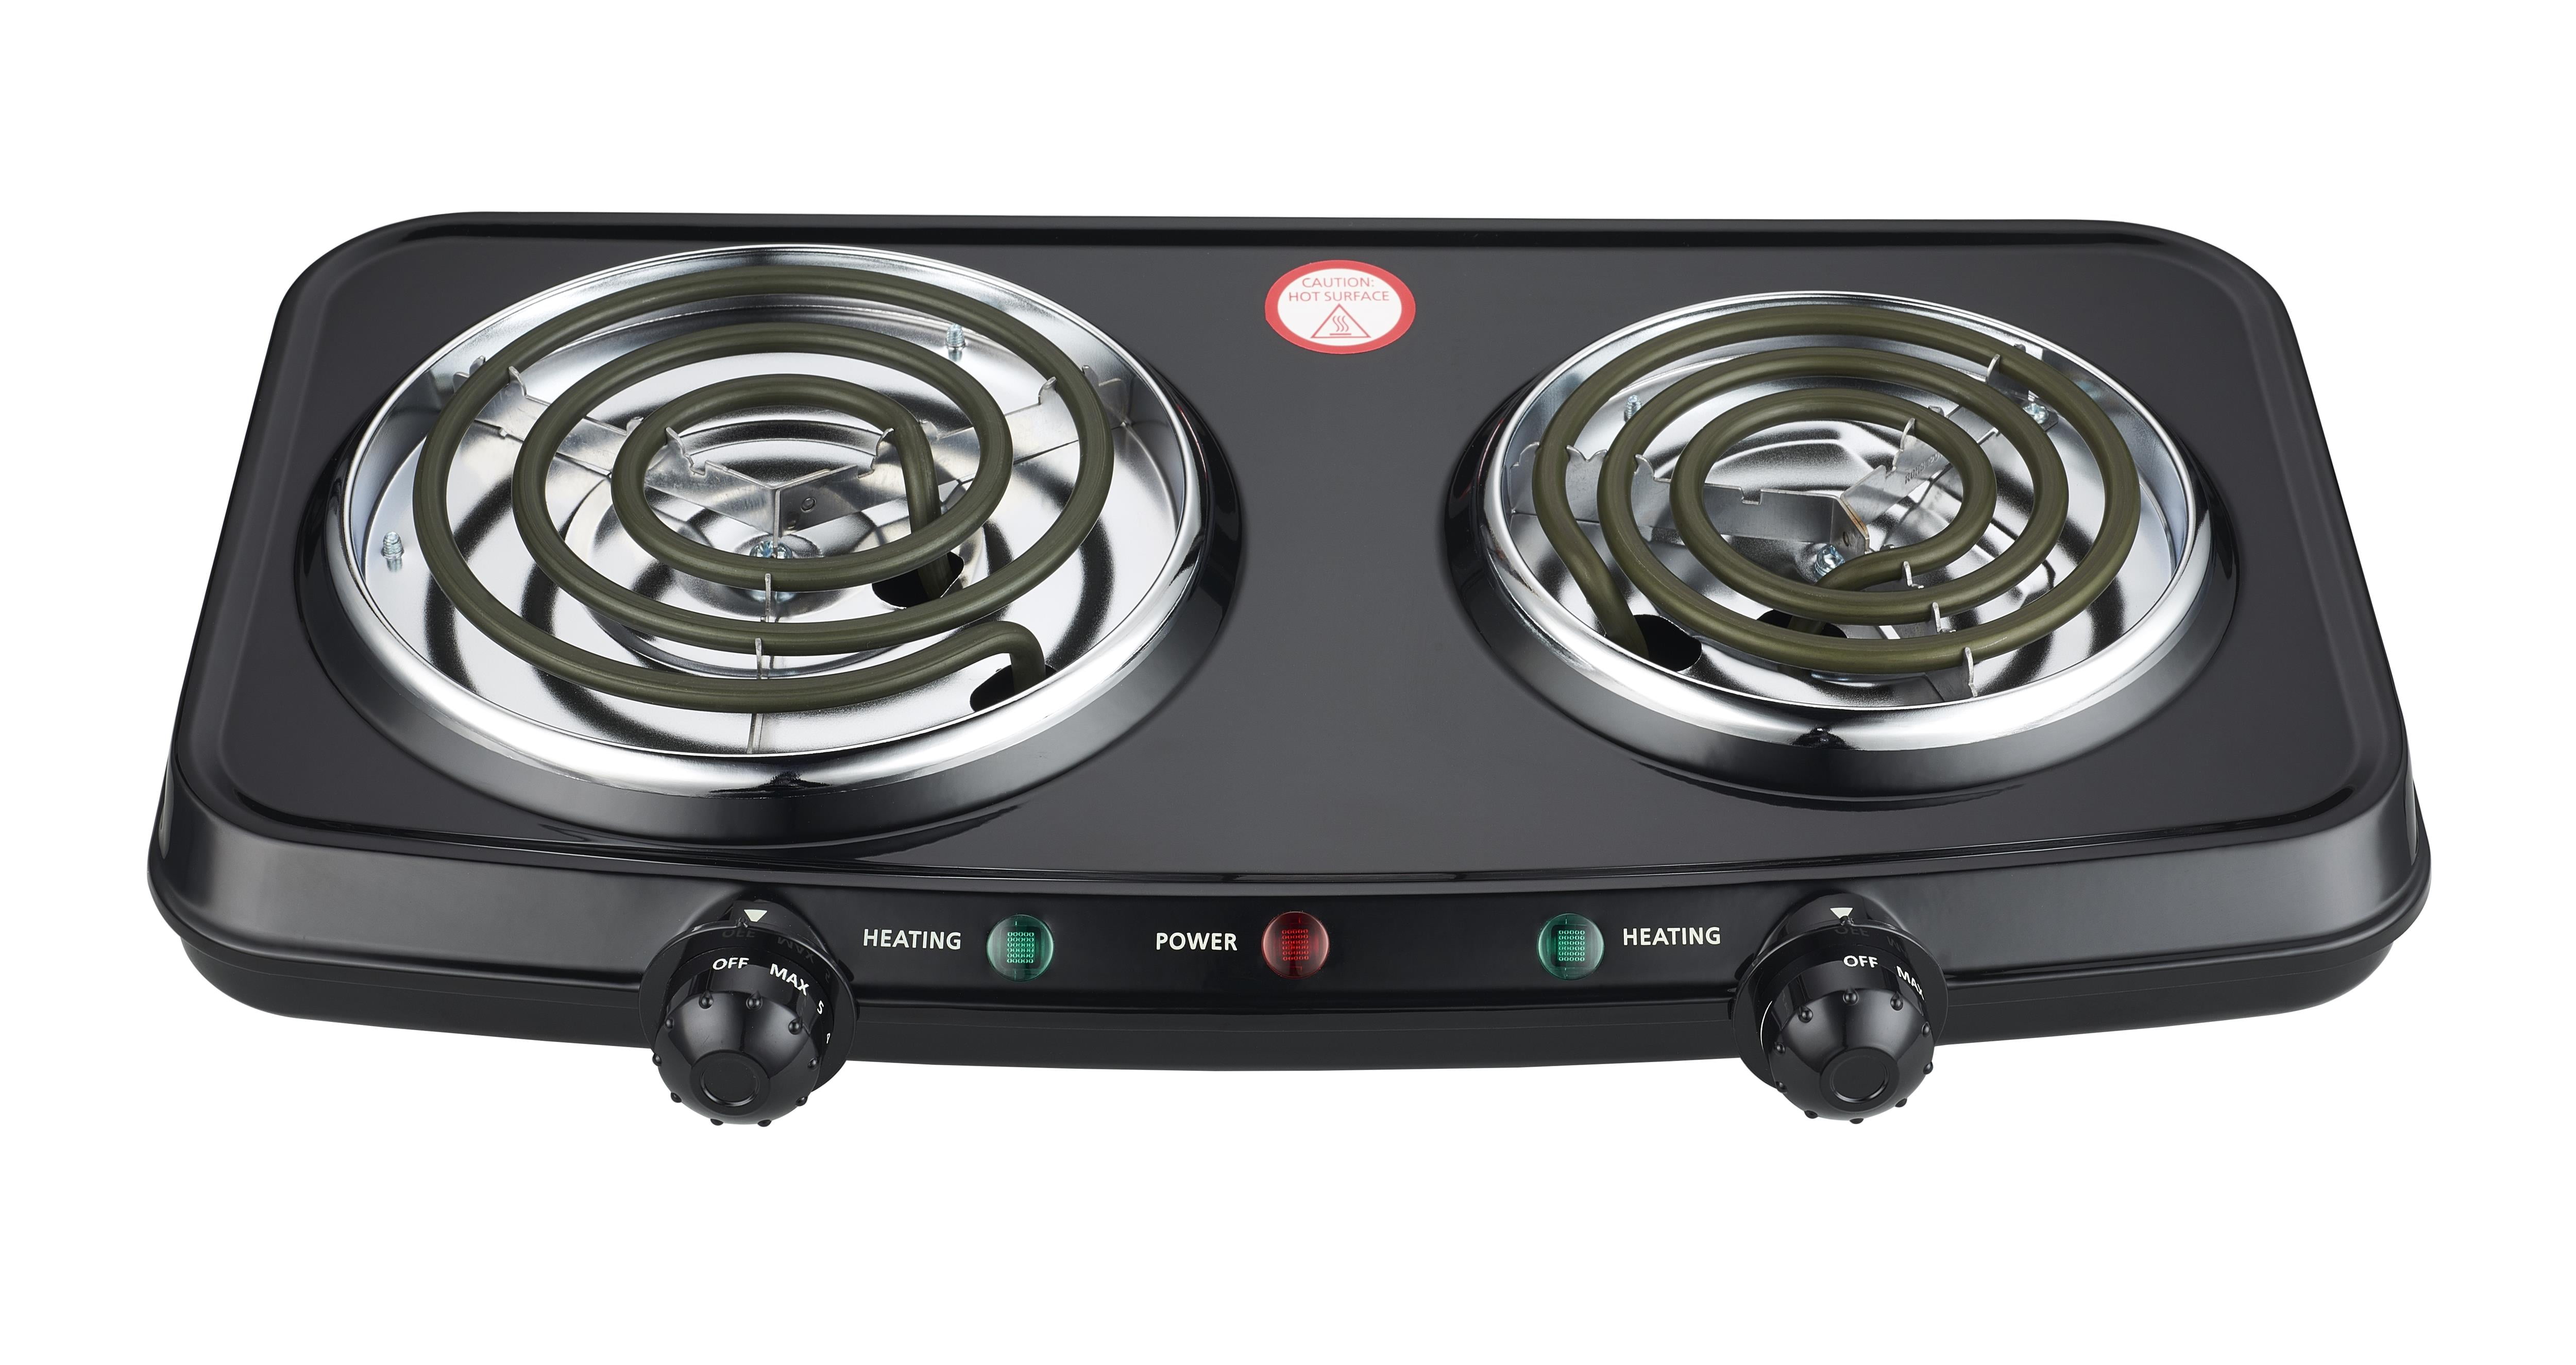  Vayepro 2 Burner Griddle Pan with Glass Lid,Stove Top